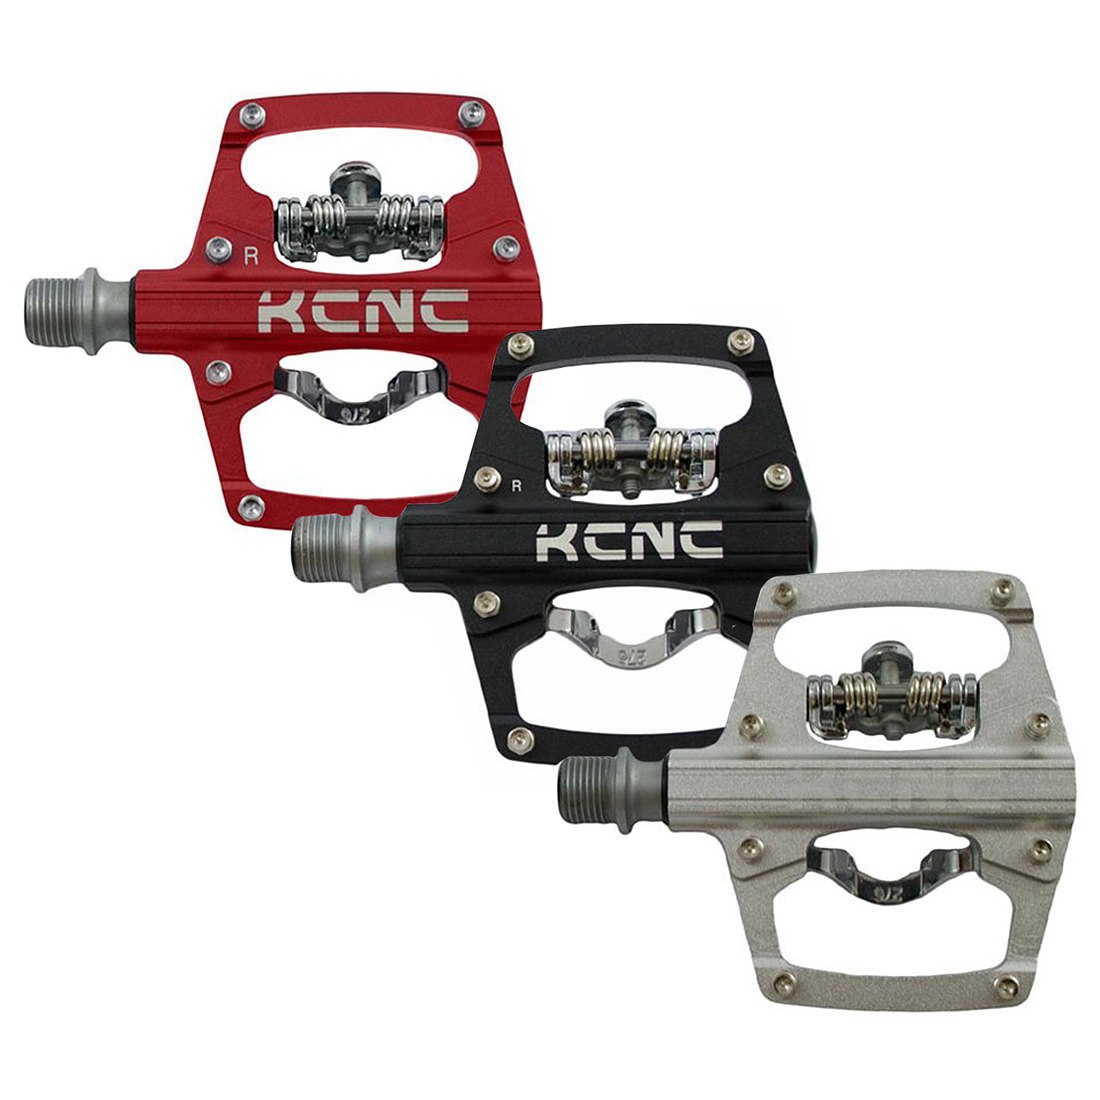 Picture of KCNC AM TRAP-TI Clipless Pedal with Titanium Axle - different colors